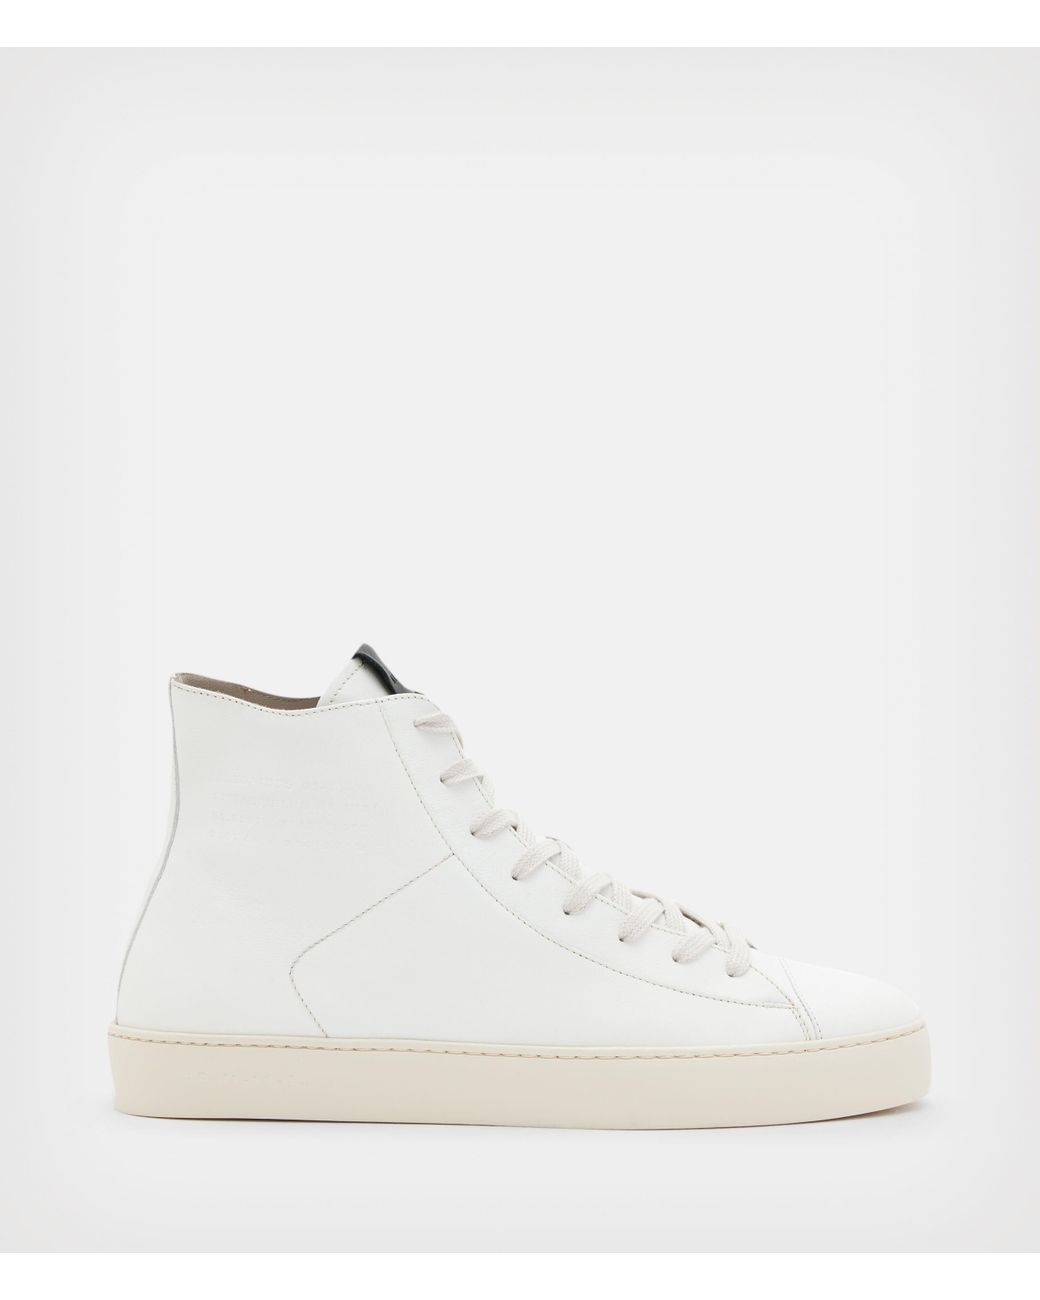 AllSaints Sloane High Top Trainers in White for Men | Lyst